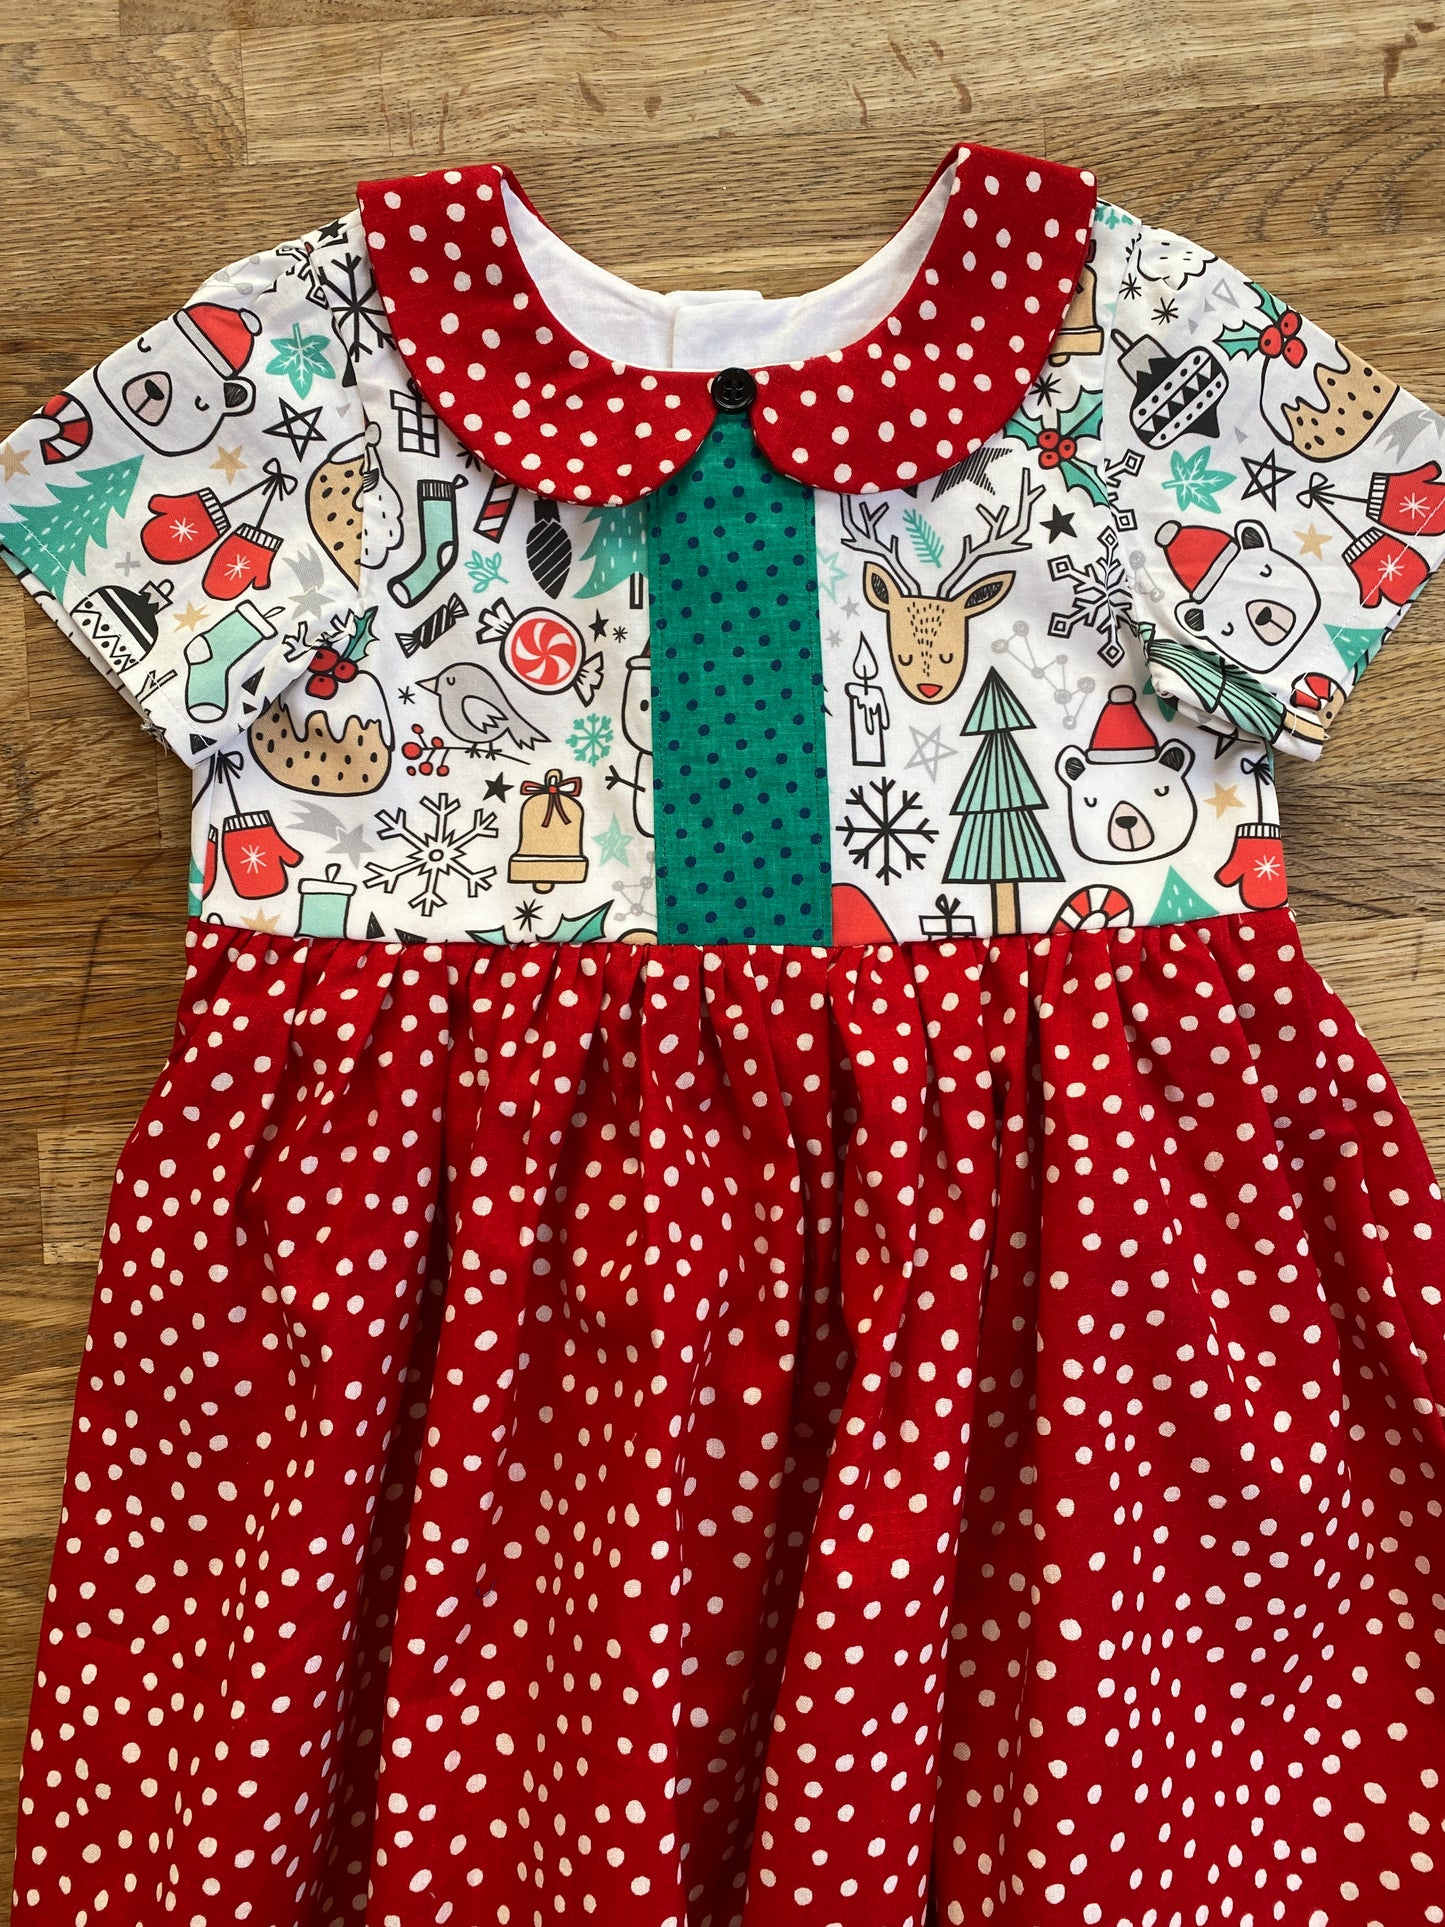 Red & White Polka Dot Holiday Dress - Candy Canes and Reindeer - Size 4t